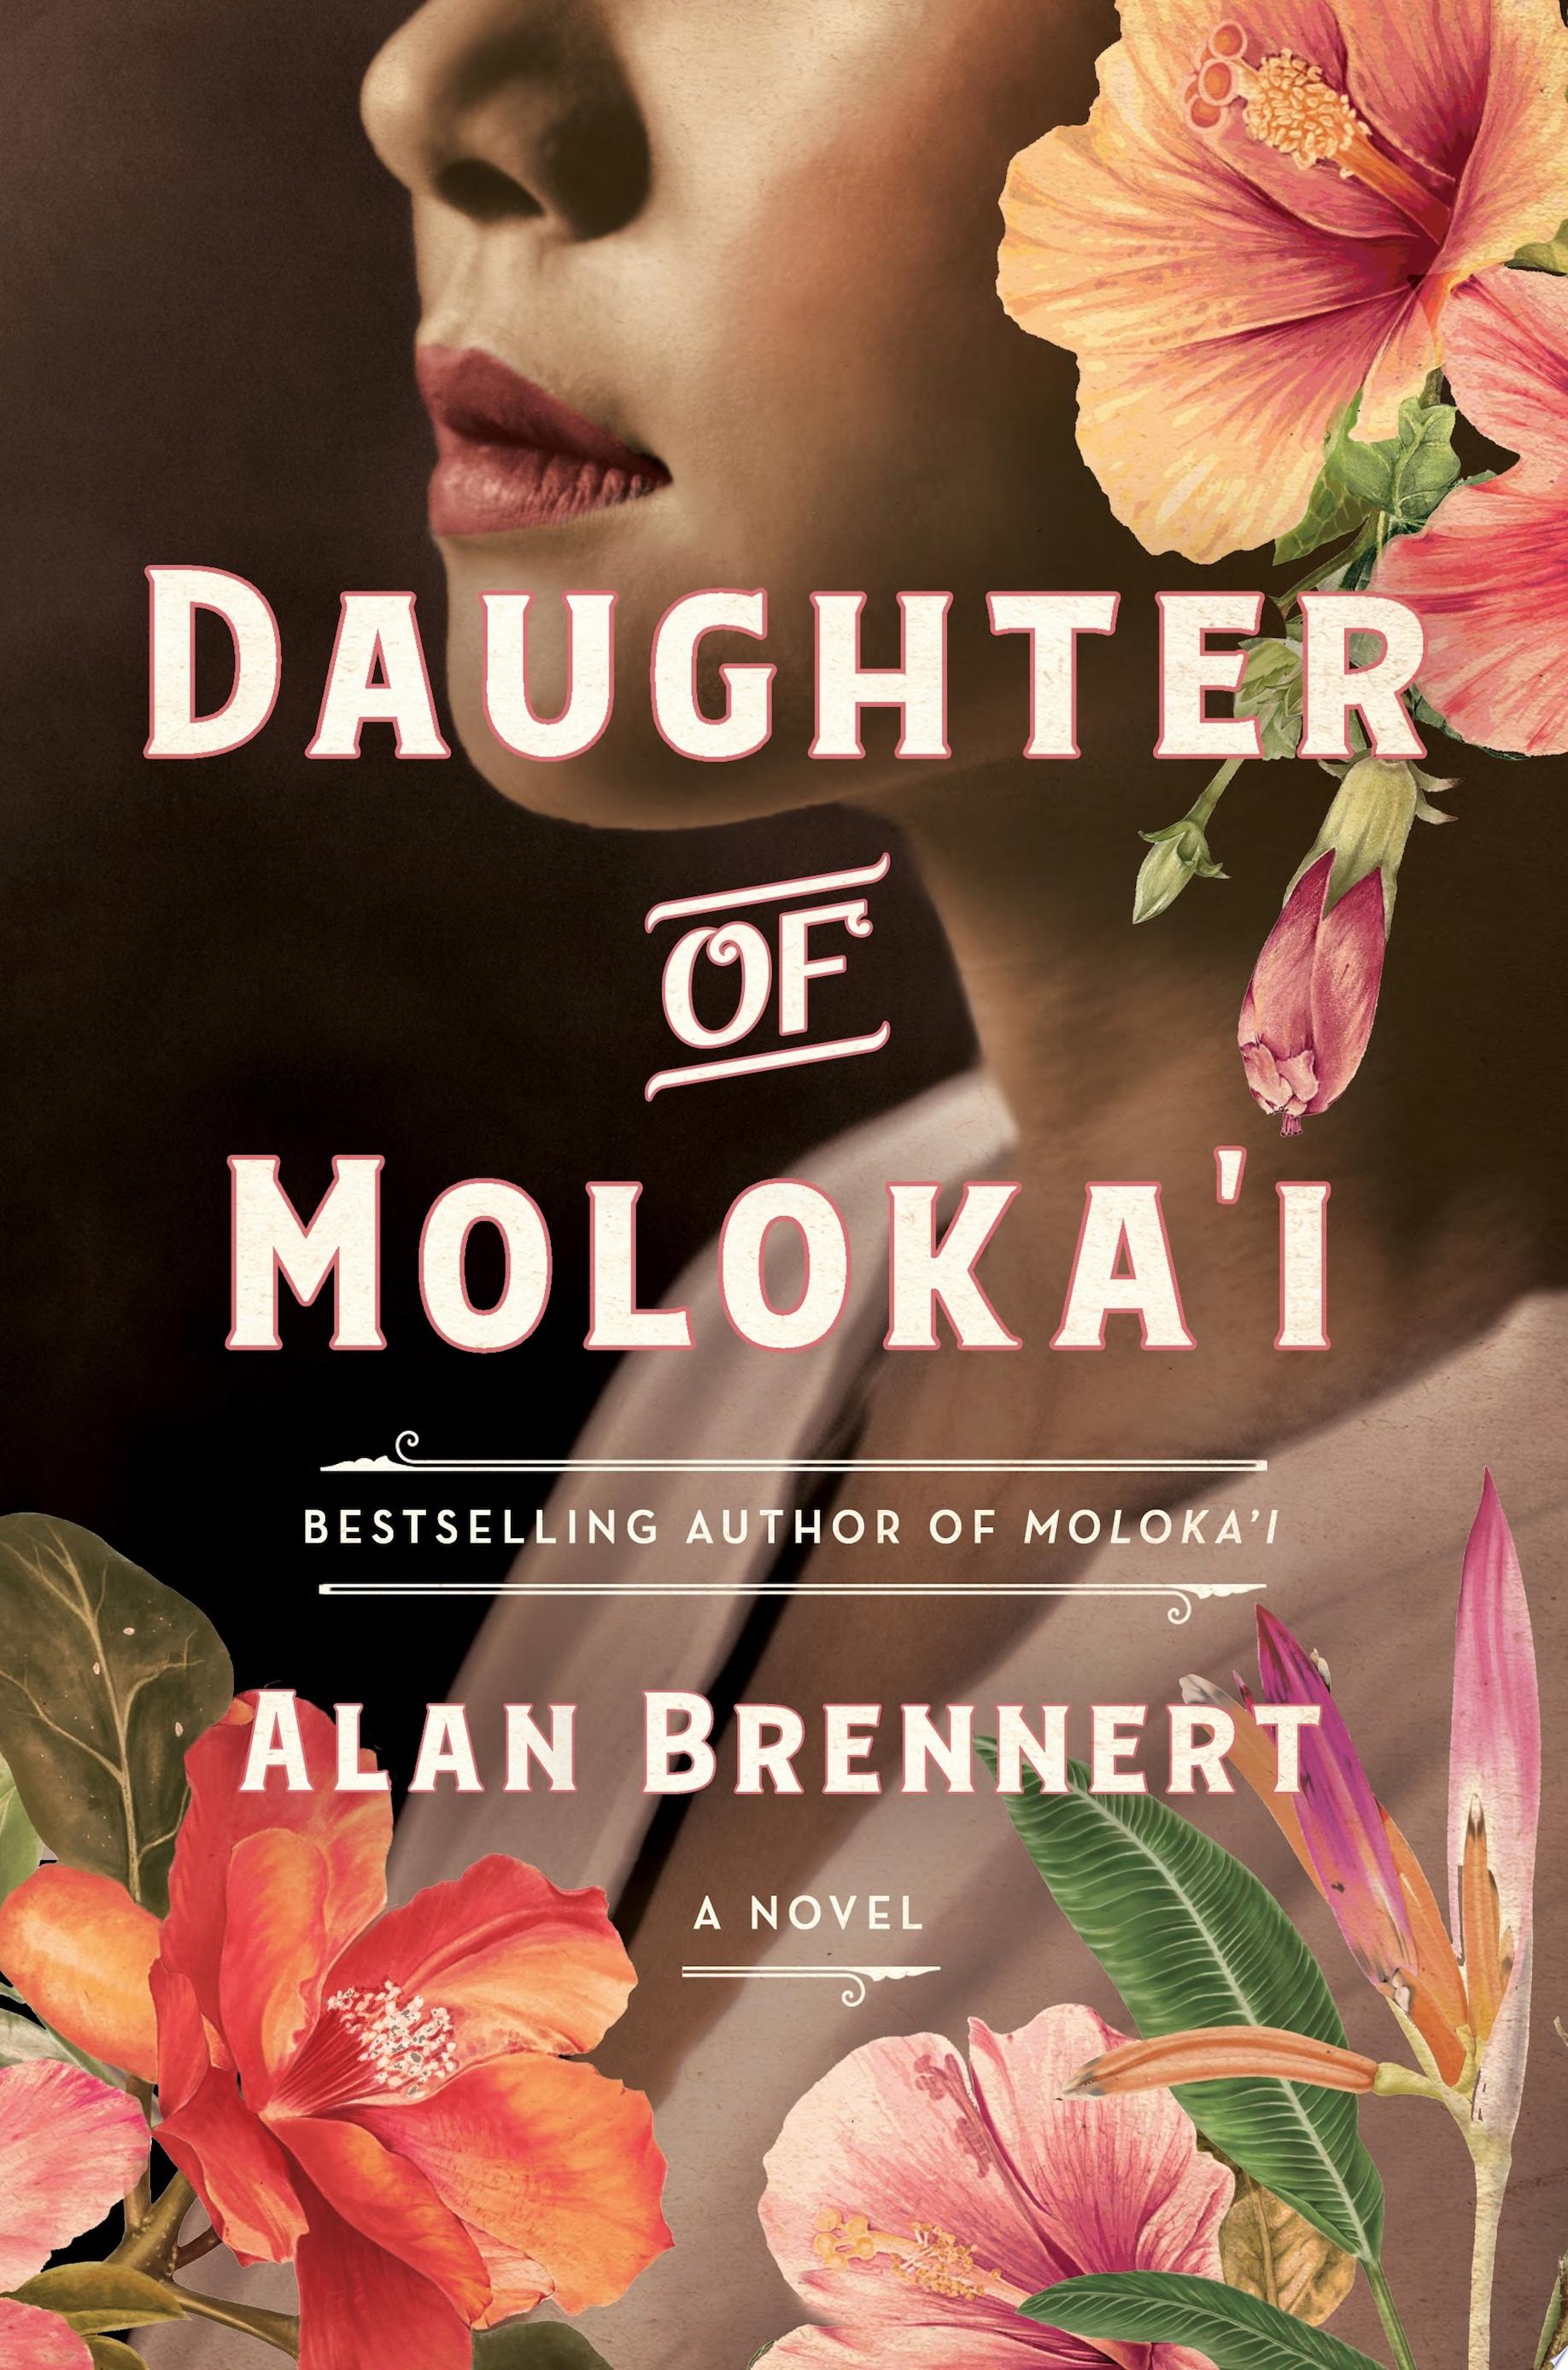 Image for "Daughter of Moloka&#039;i"